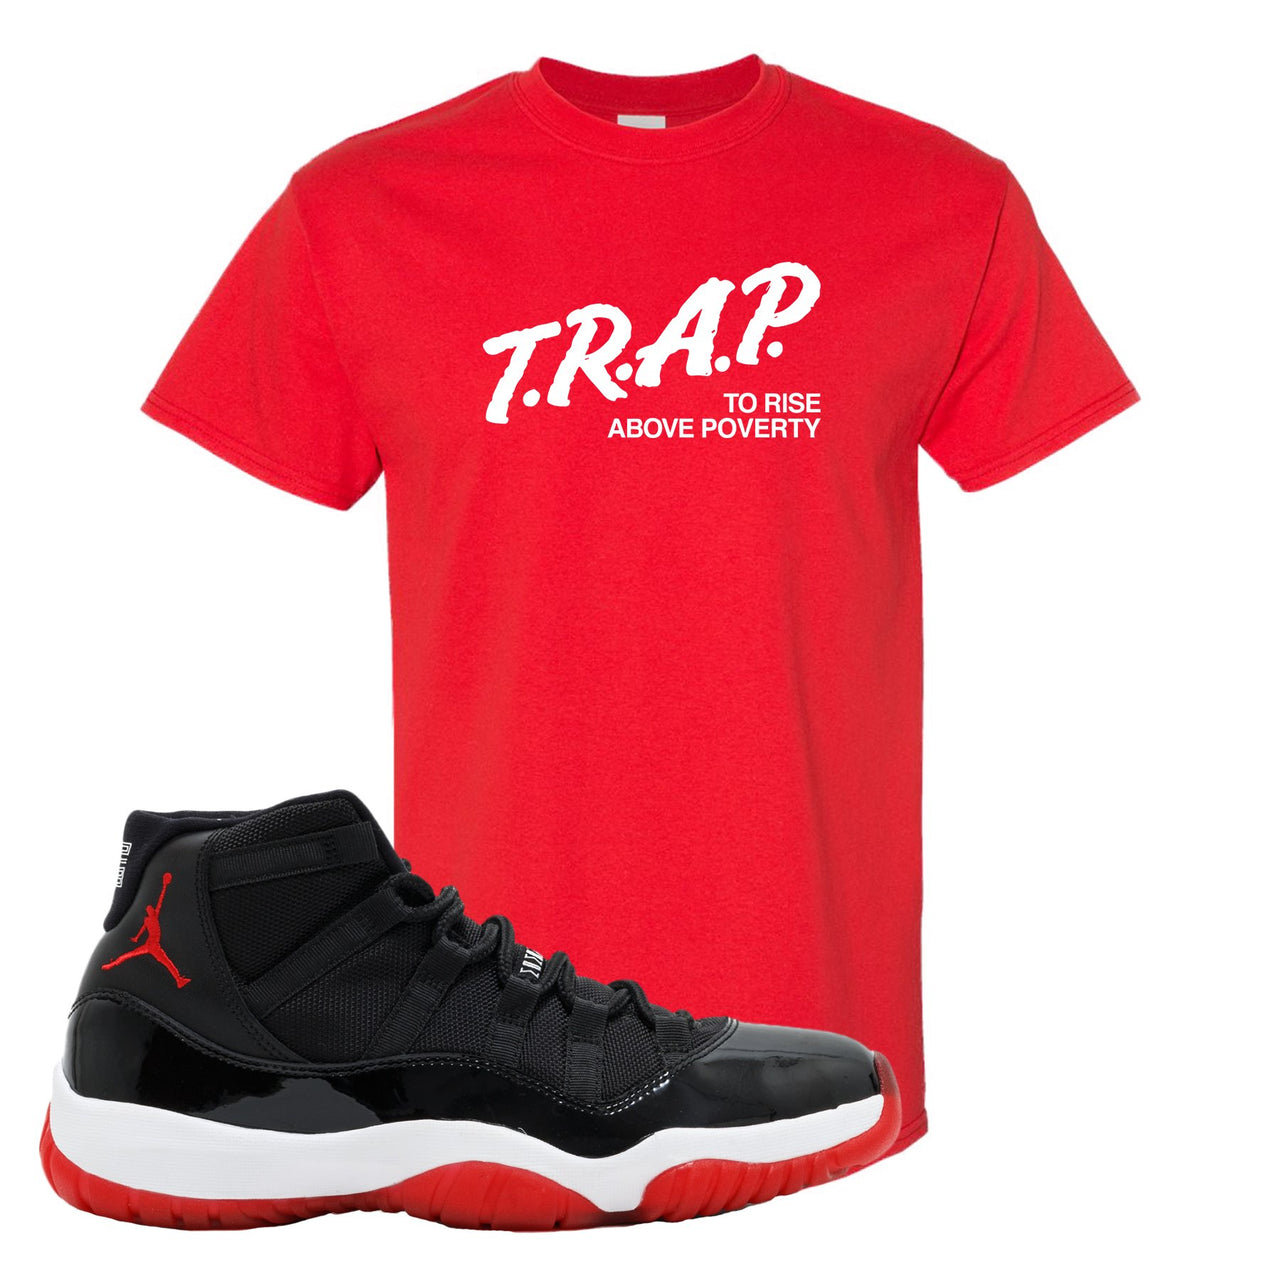 Jordan 11 Bred Trap To Rise Above Poverty Red Sneaker Hook Up T-Shirt